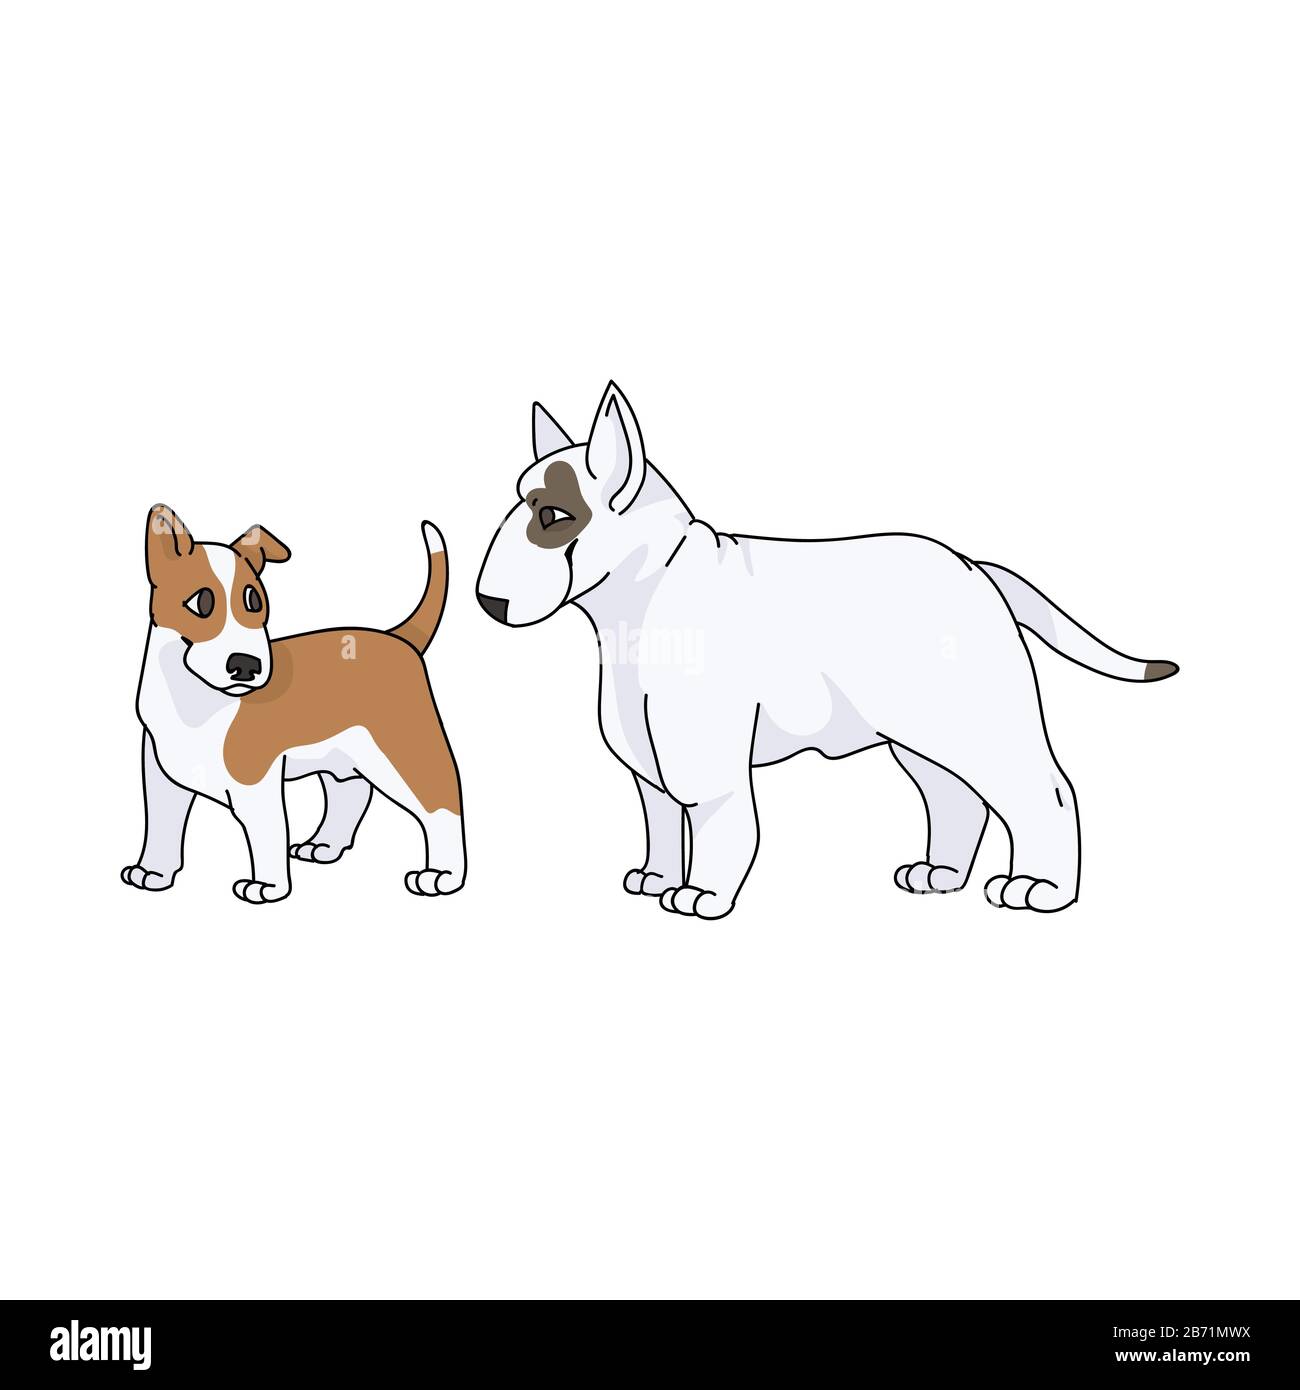 Cute cartoon bull terrier dog and puppy vector clipart. Pedigree kennel show dog for dog lovers. Purebred domestic pooch for pet parlor illustration Stock Vector